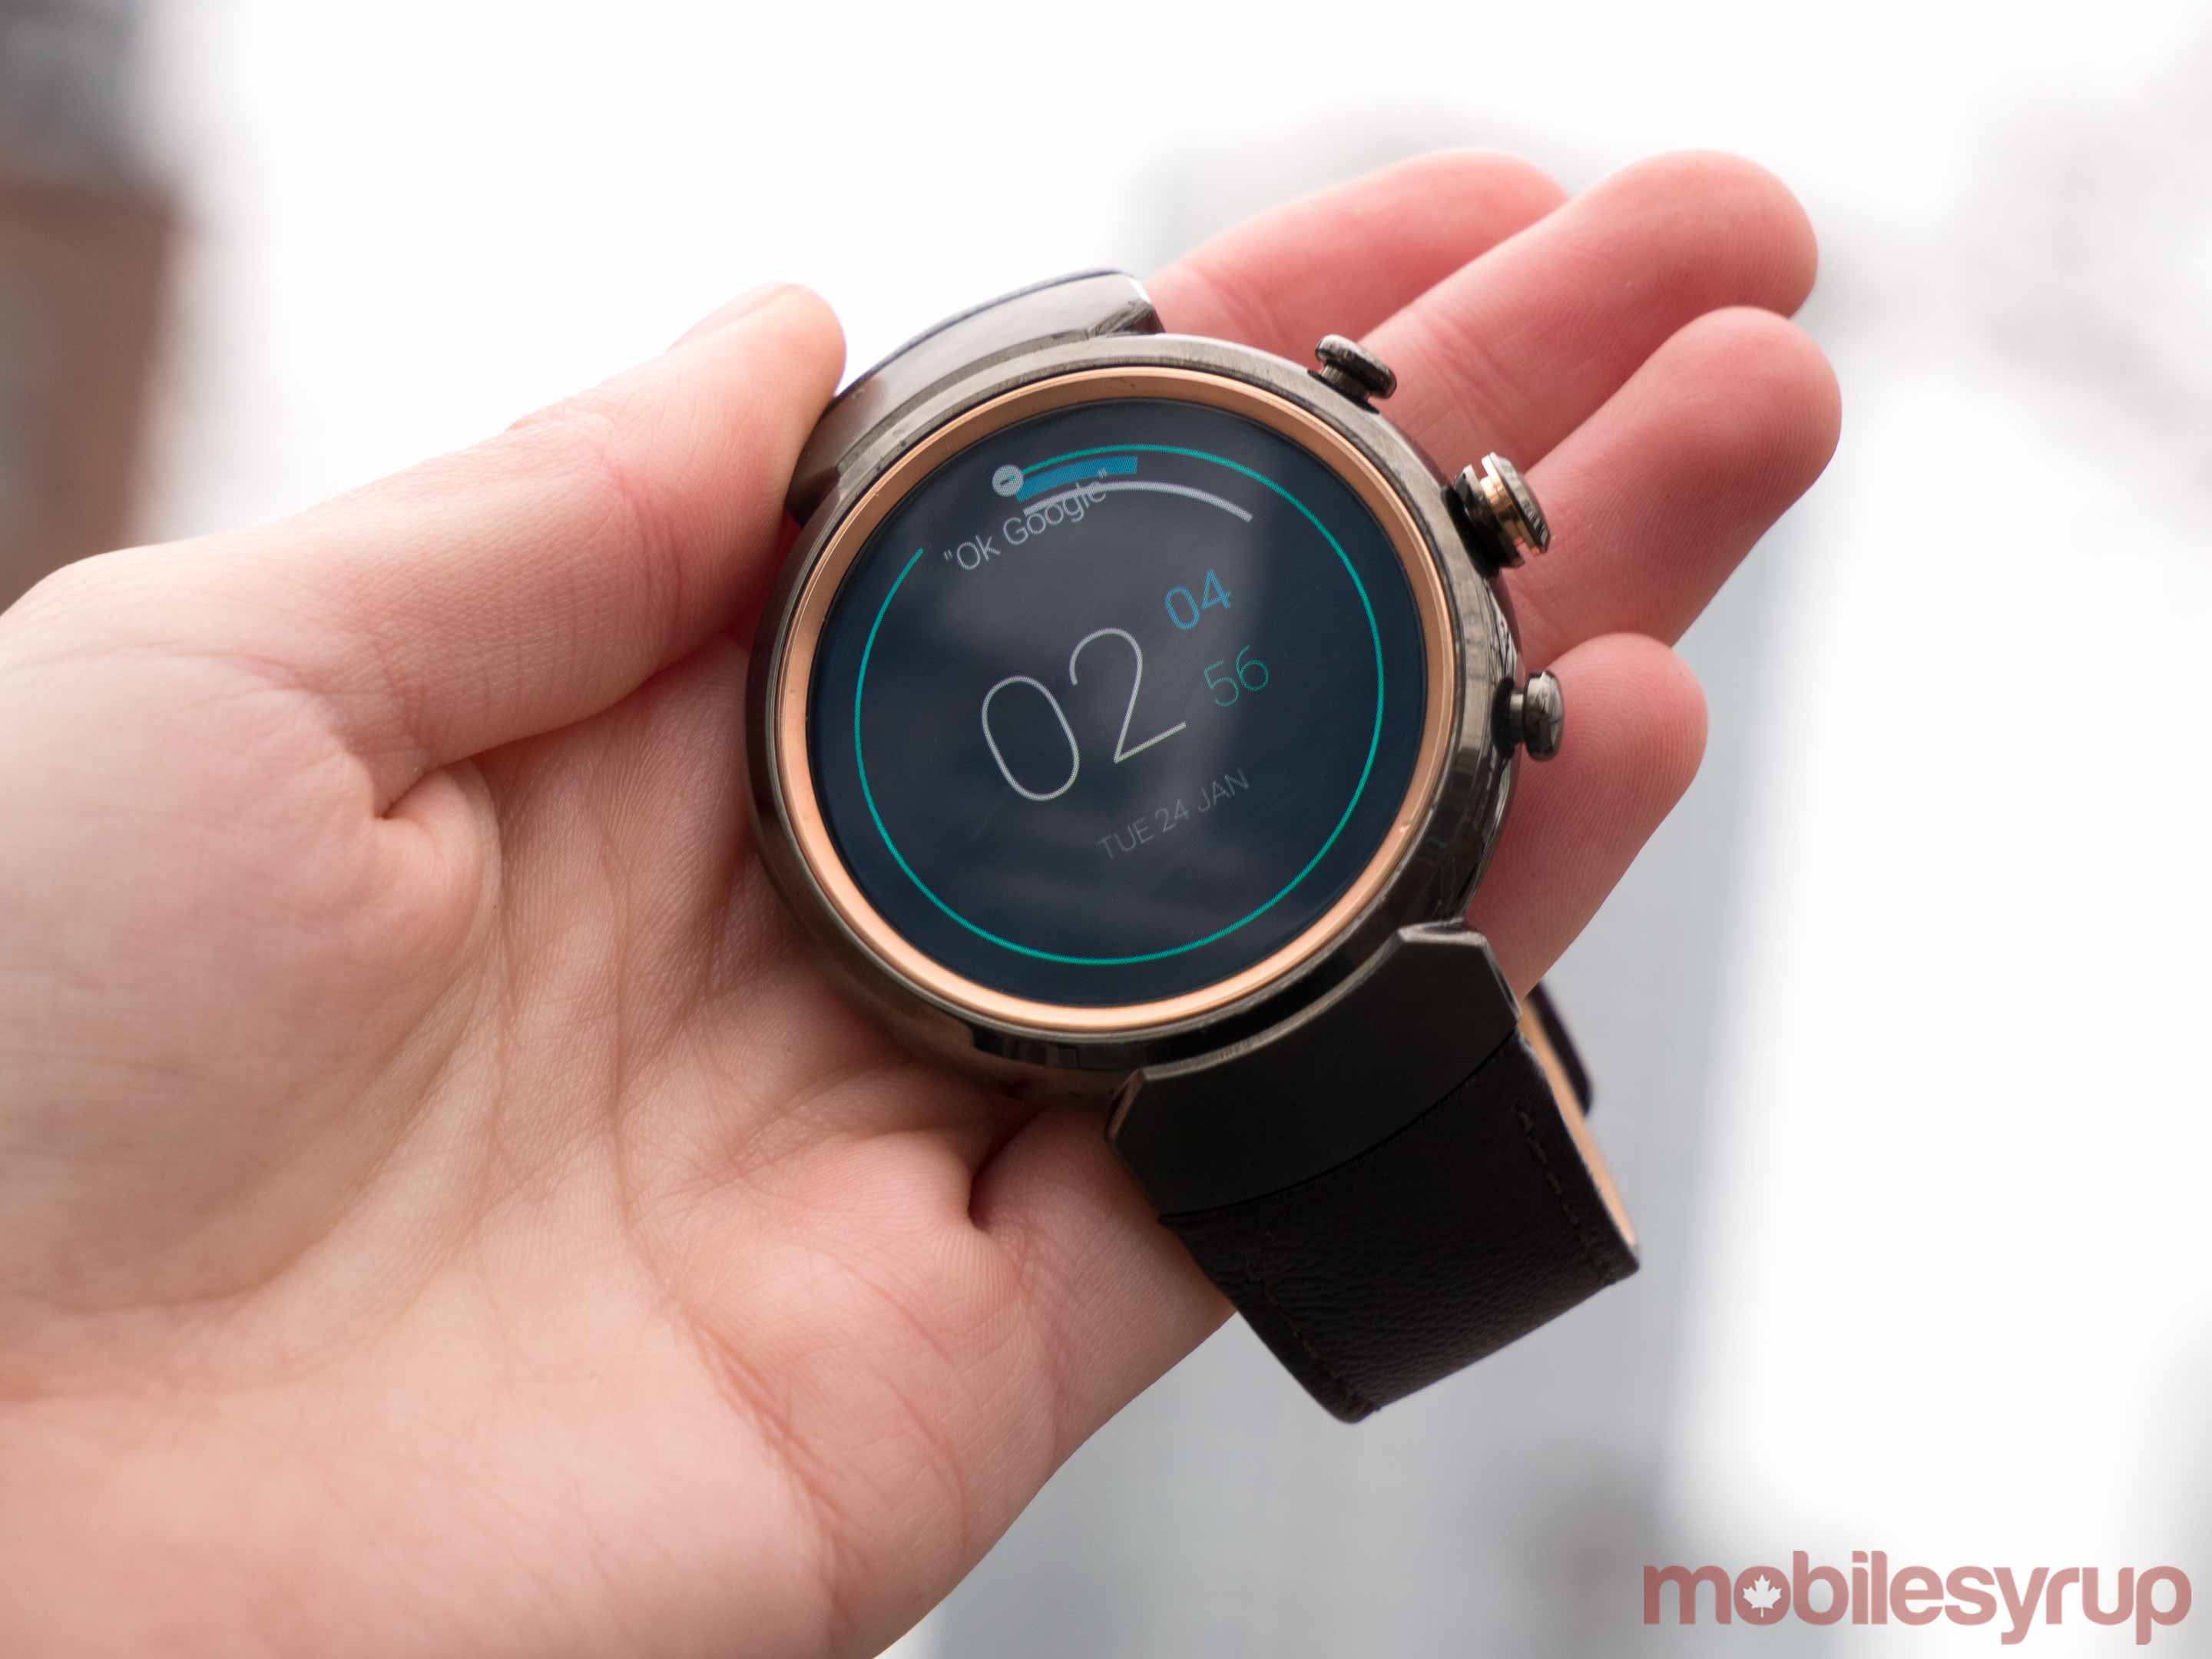 Holding a ZenWatch 3